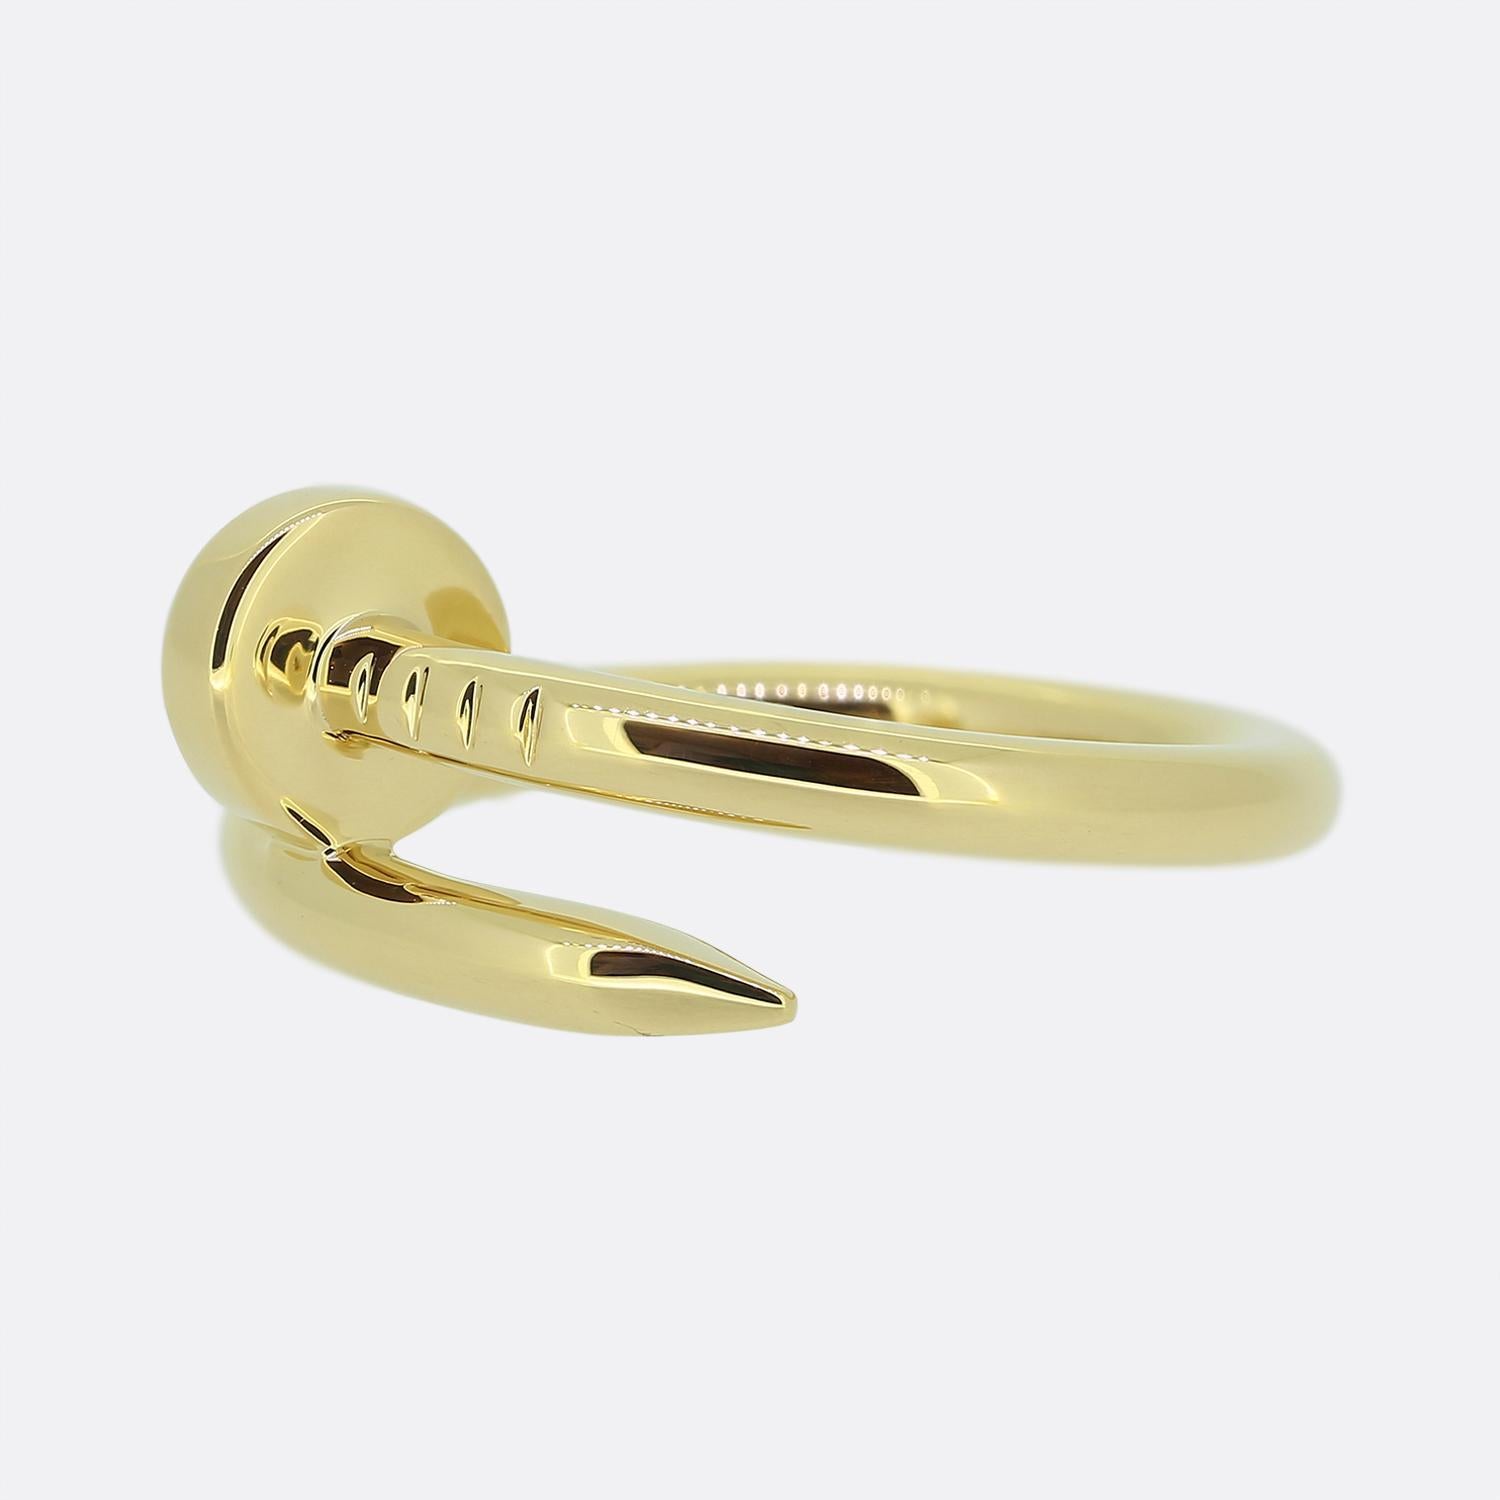 Here we have an excellently crafted 18ct yellow gold ring from the world renowned jewellery house of Cartier. This piece forms part of their iconic 'Juste un Clou' collection and showcases a wrap-around nail design. This is the standard model with a